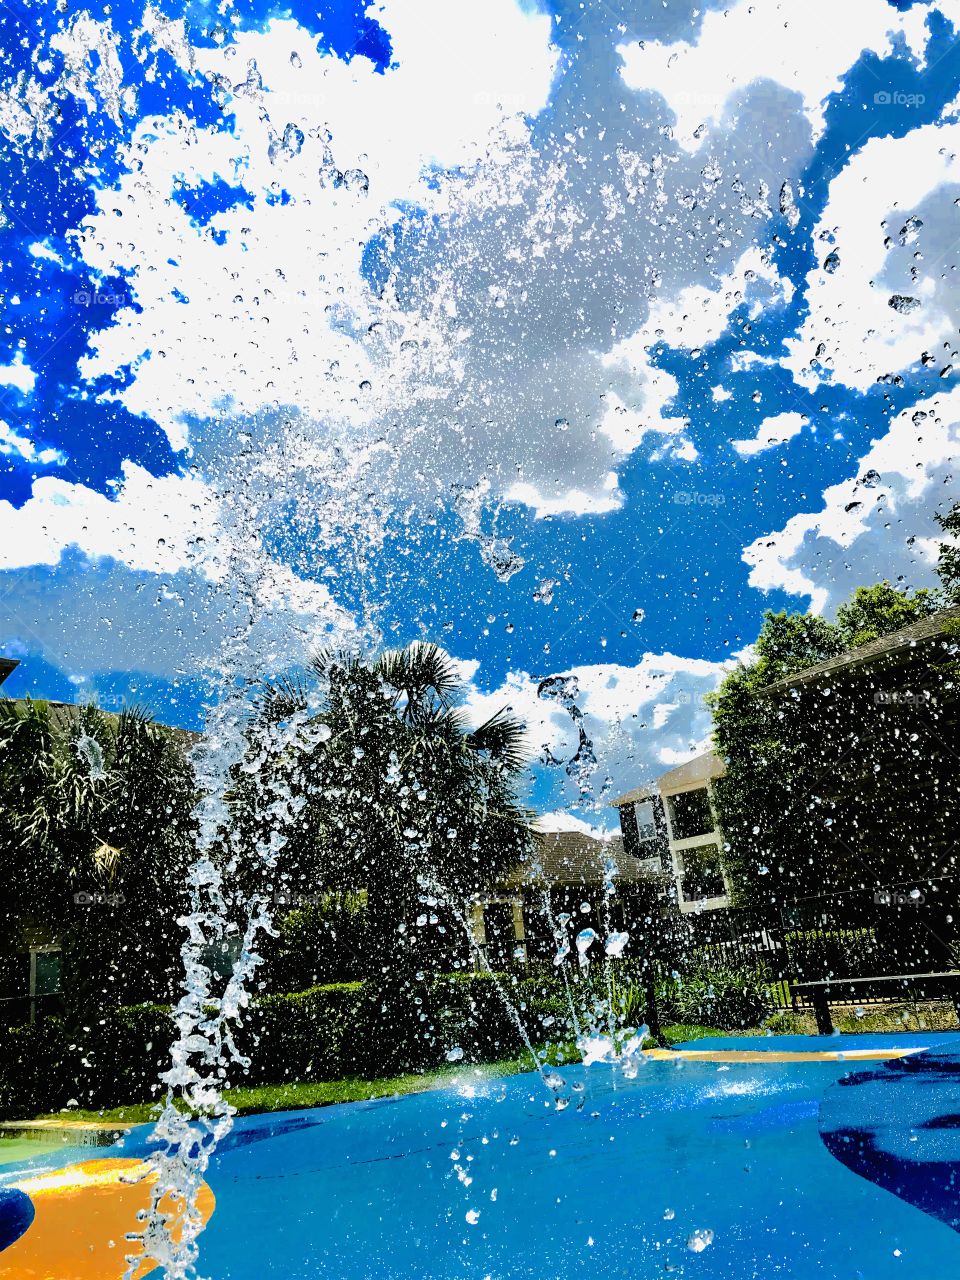 Water is Life. Hot summer day vs cool summer play. Splash pad - apartment living :) Beauty is all around us, do you have time to see? Makes me thirsty and happy at the same time lol. -my sons third birthday, iPhone 7s+ camera shooting a splash pad! ❤️